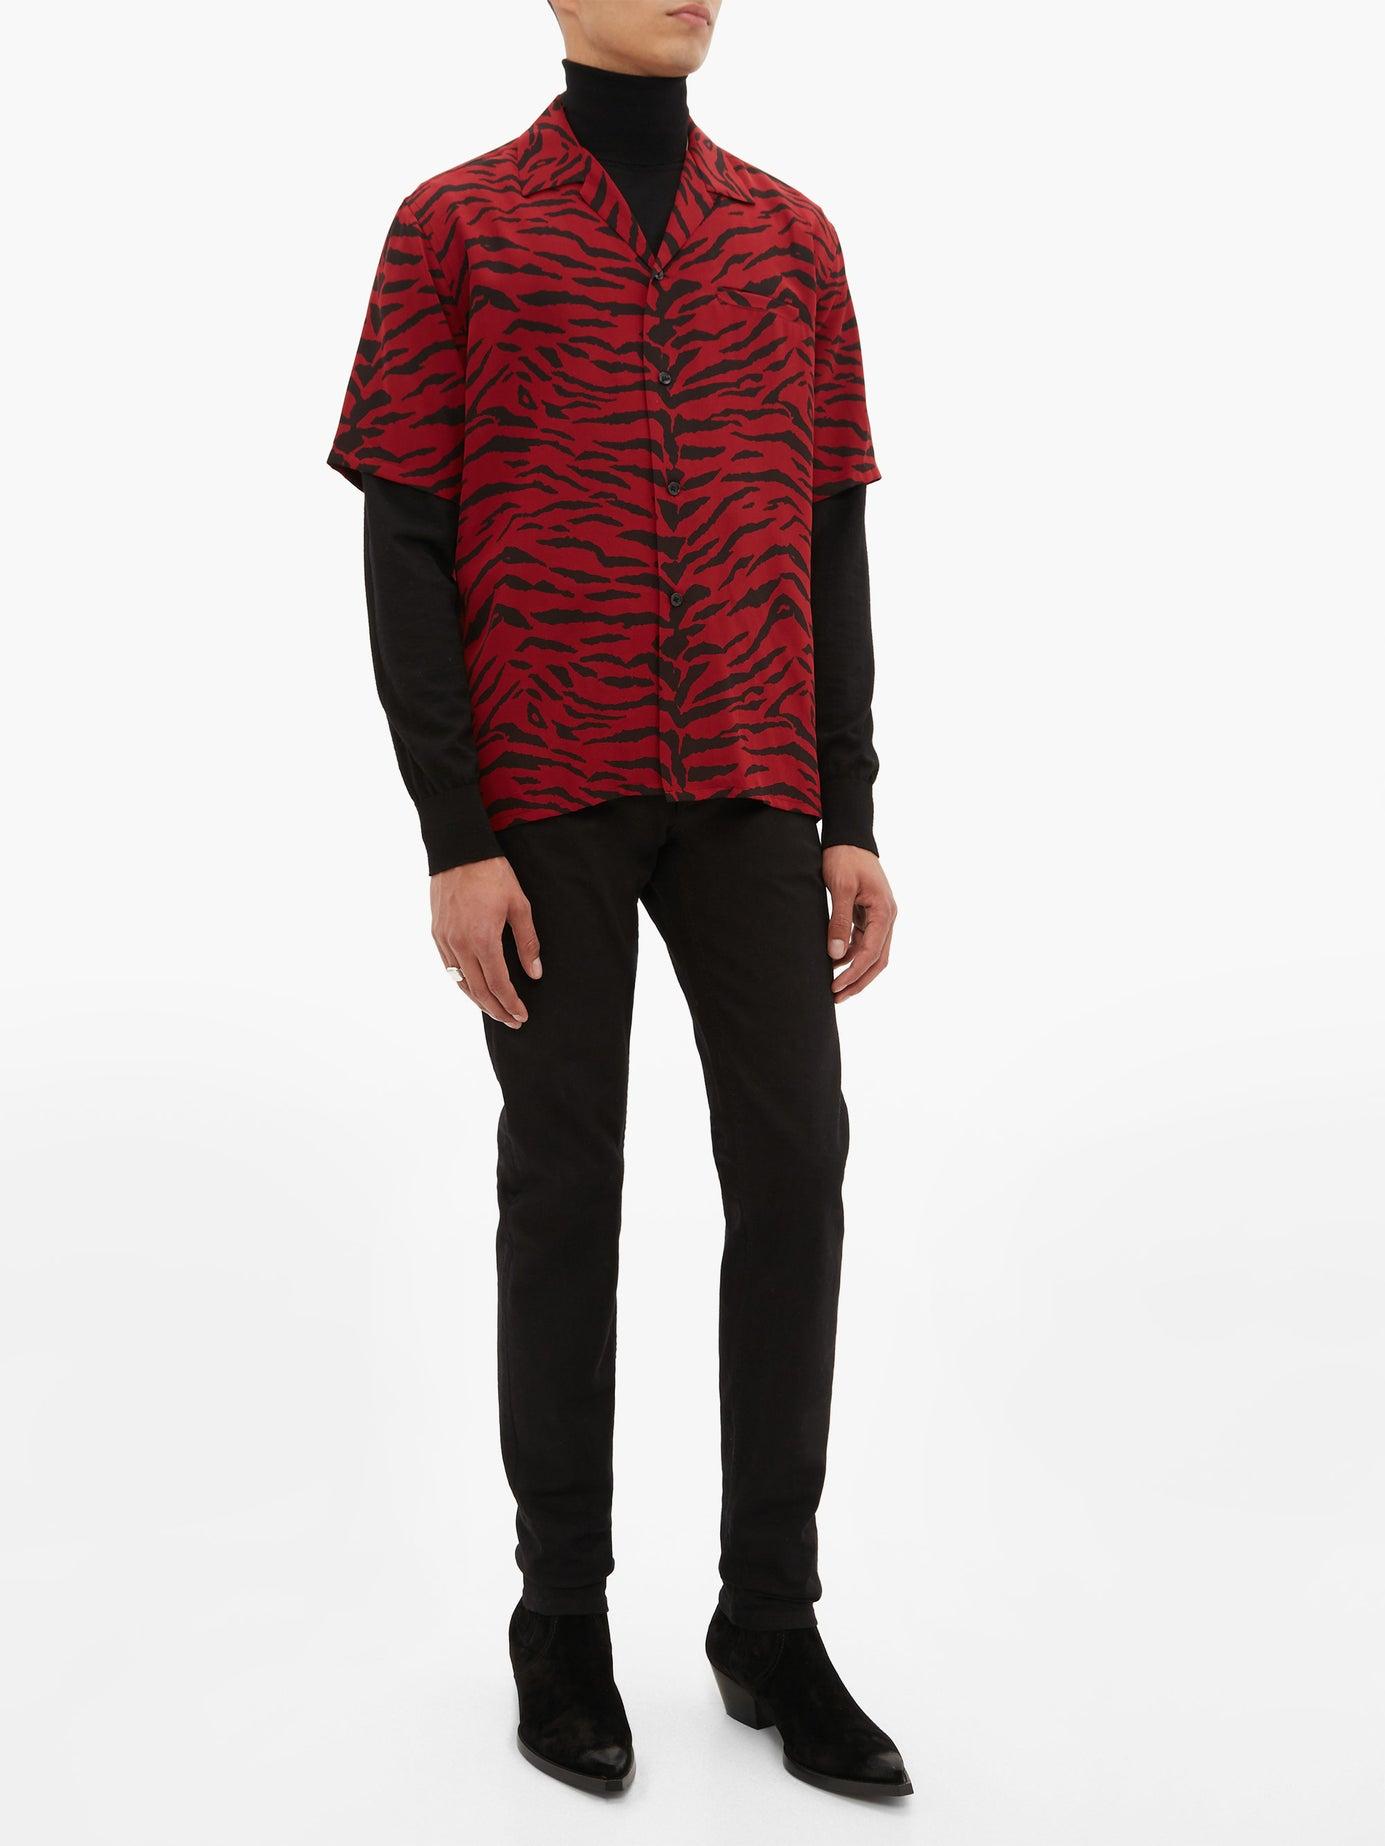 Saint Laurent Zebra Silk Vacation Shirt in Red & Black (Red) for 